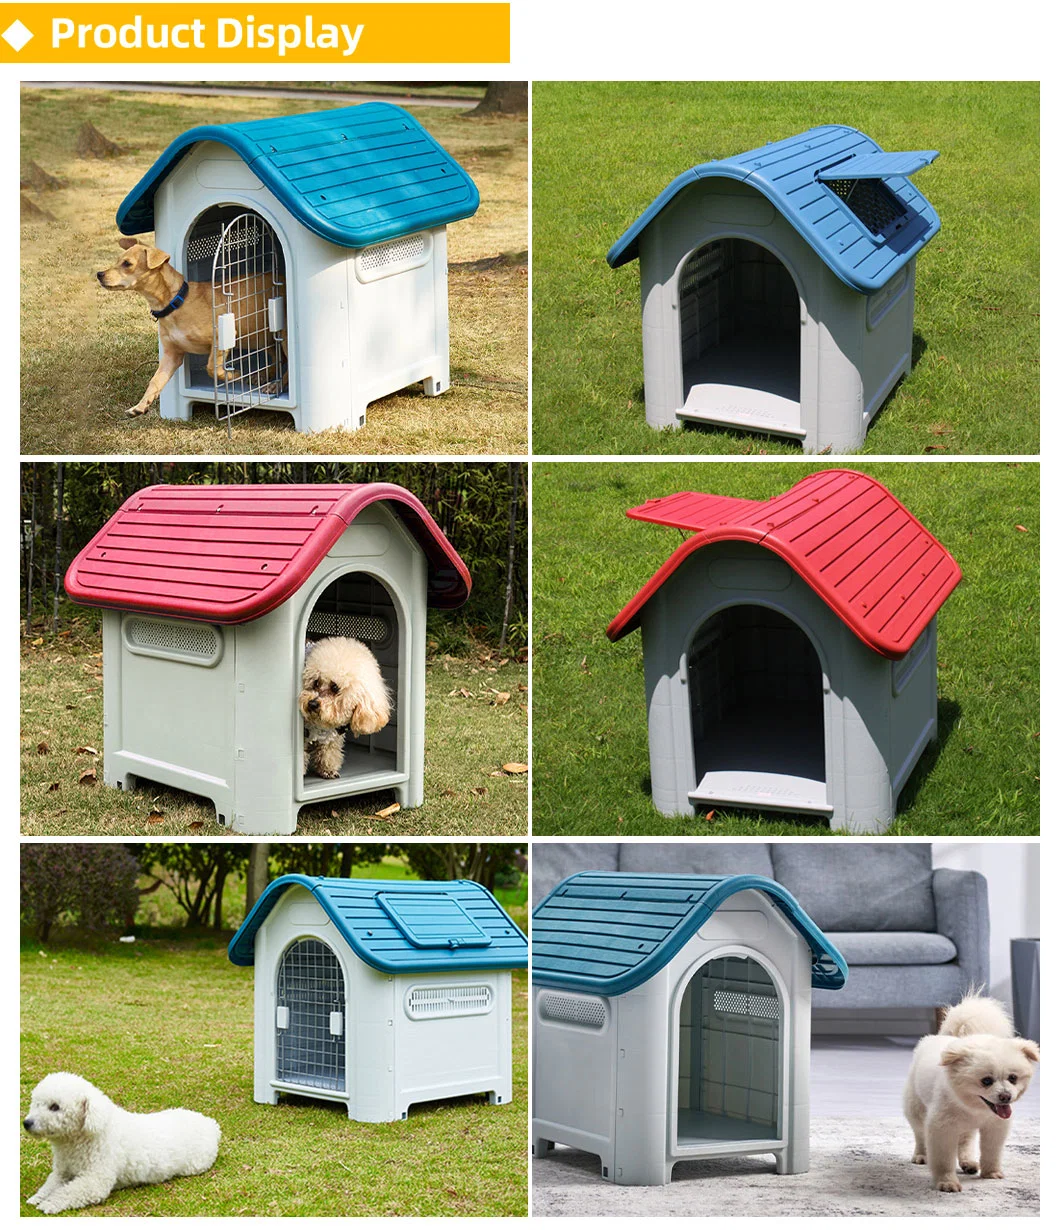 Fashion Single-Door Plastic Pet Kennel Strength and Durability Dog Bed with Air Vents